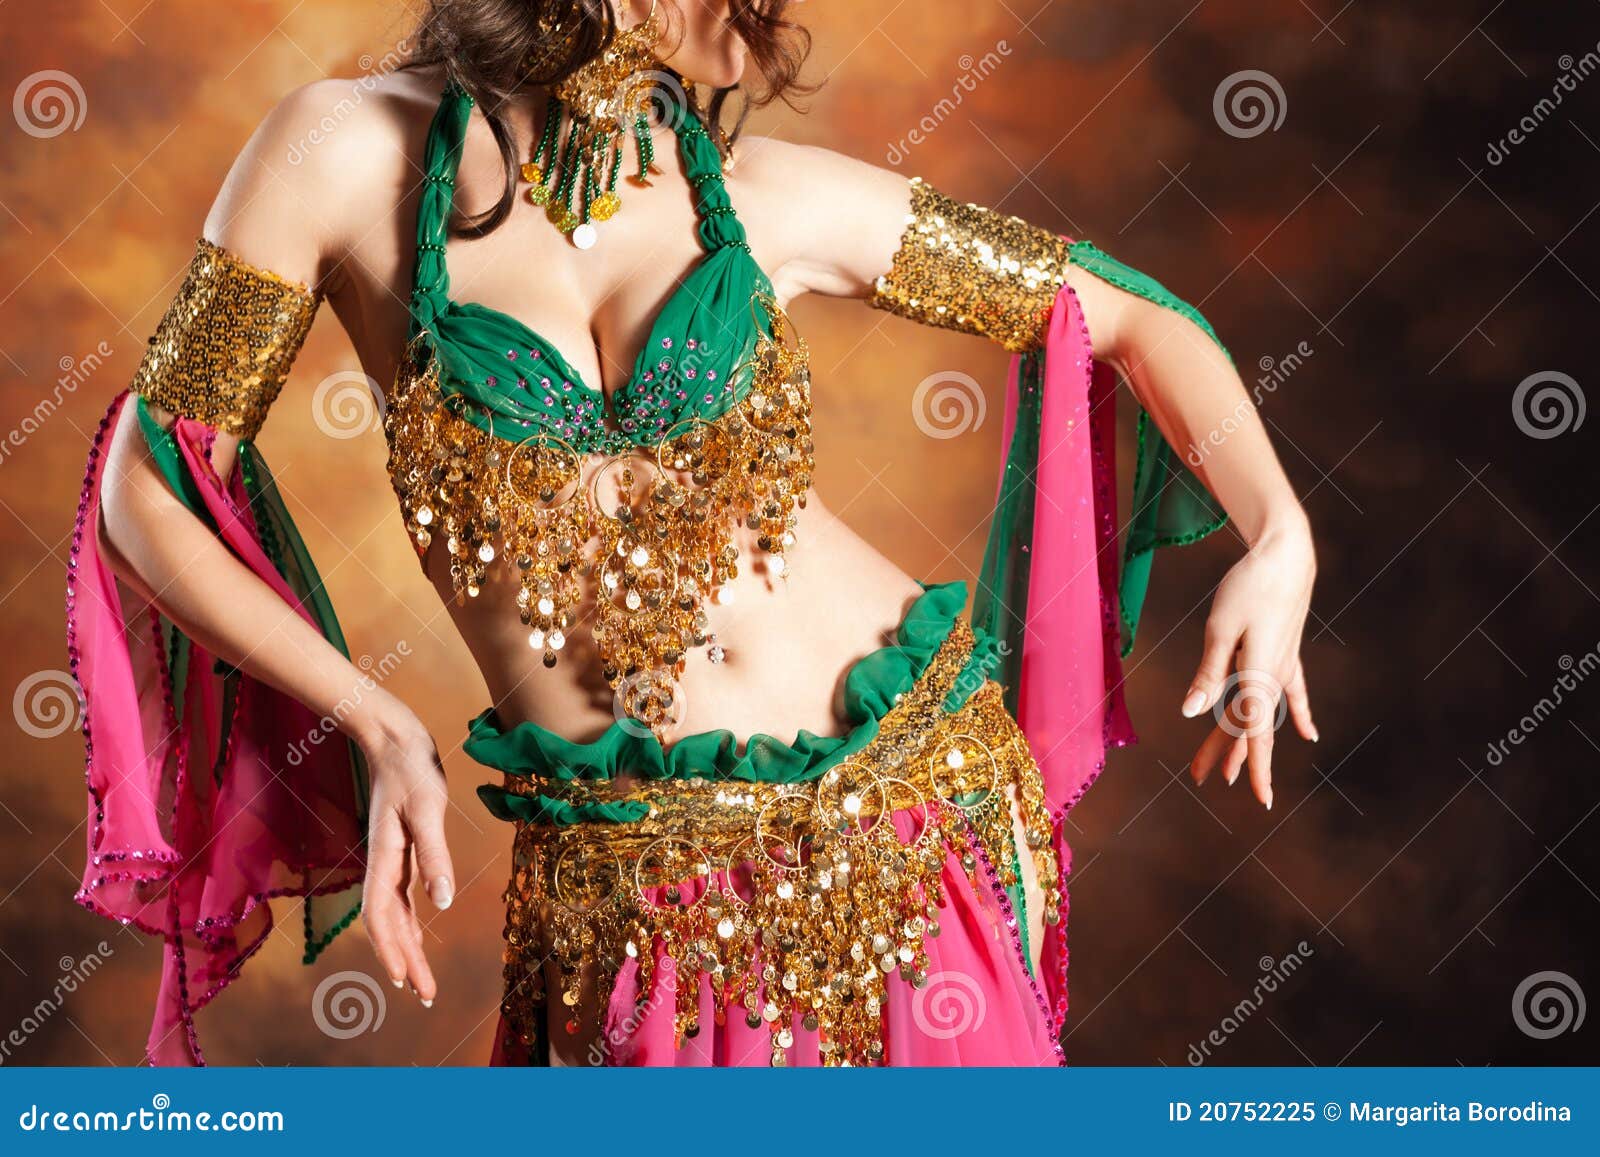 beautiful exotic belly dancer woman